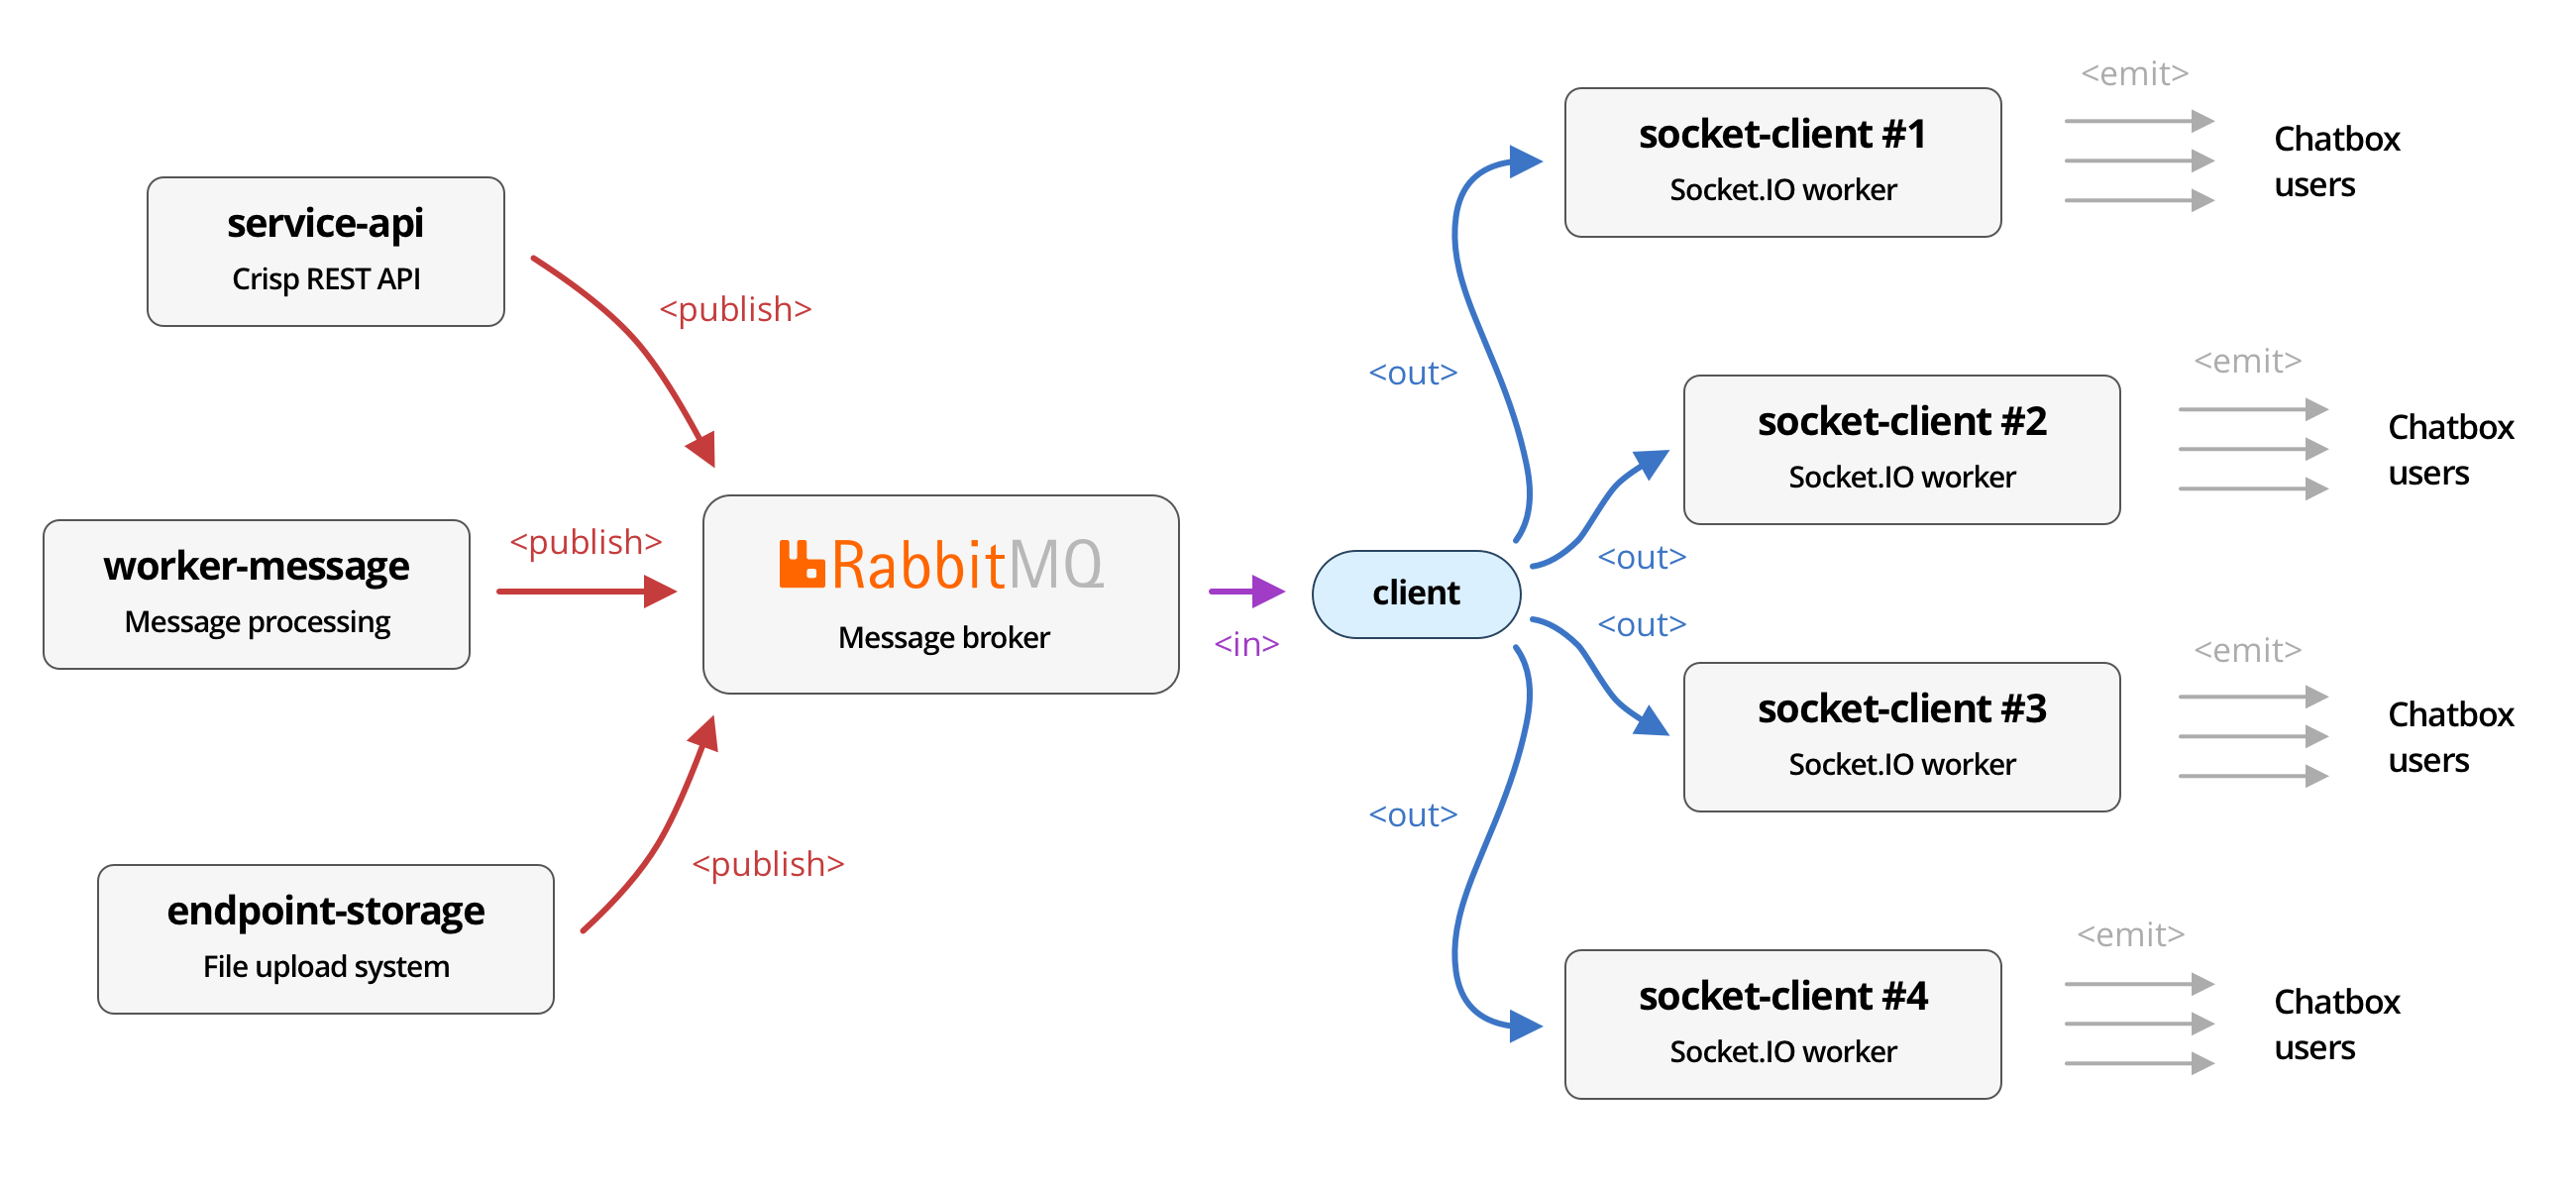 Horizontal Scaling of Socket.IO Microservices with RabbitMQ